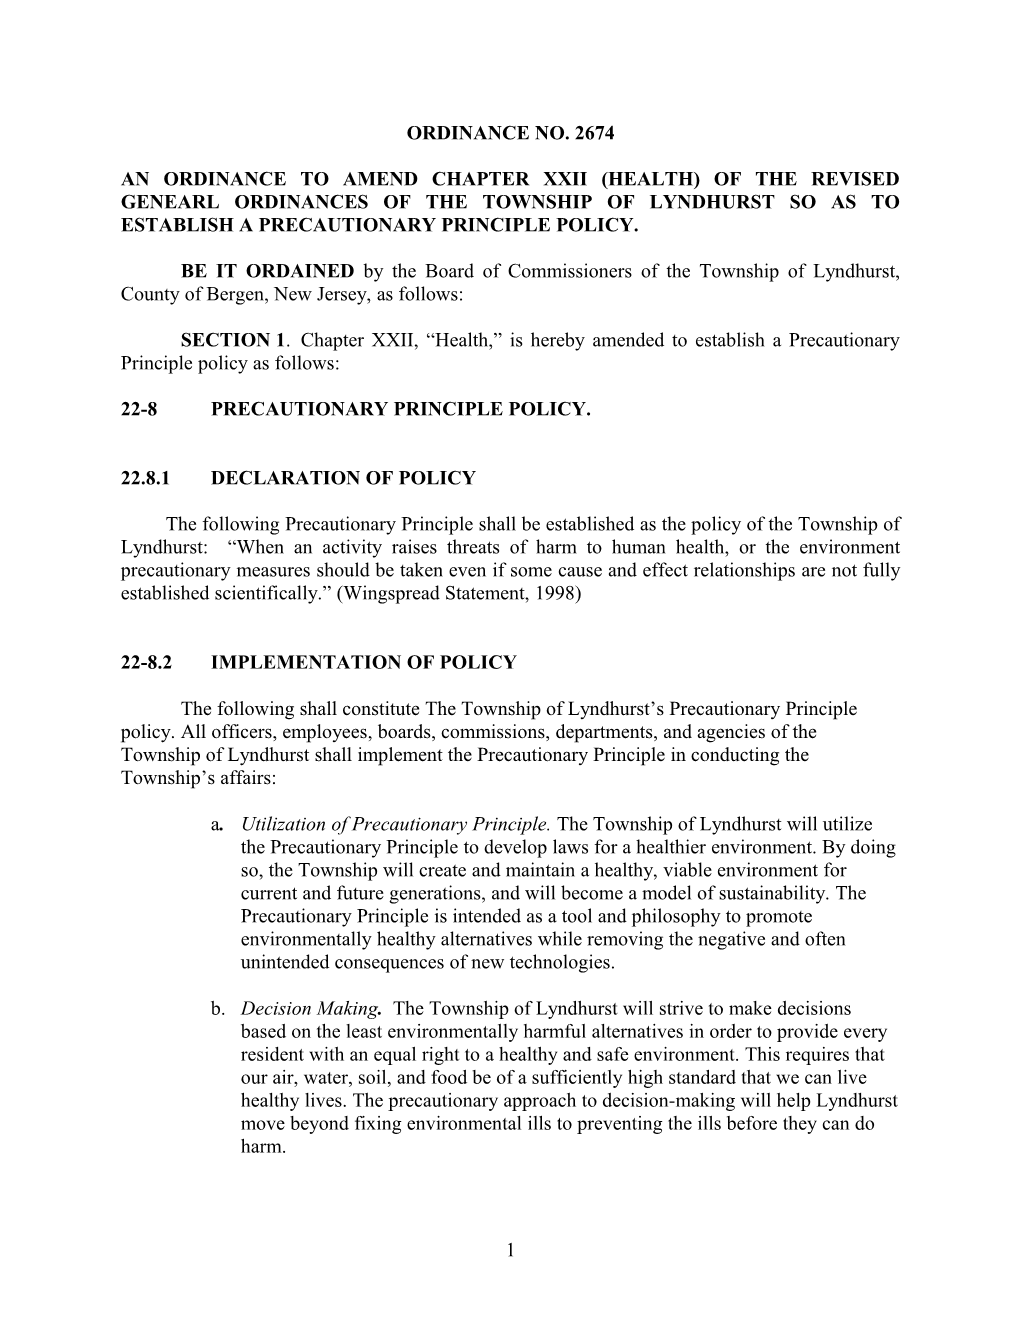 An Ordinance to Amend Chapter Xxii (Health) of the Revised Genearl Ordinances of the Township